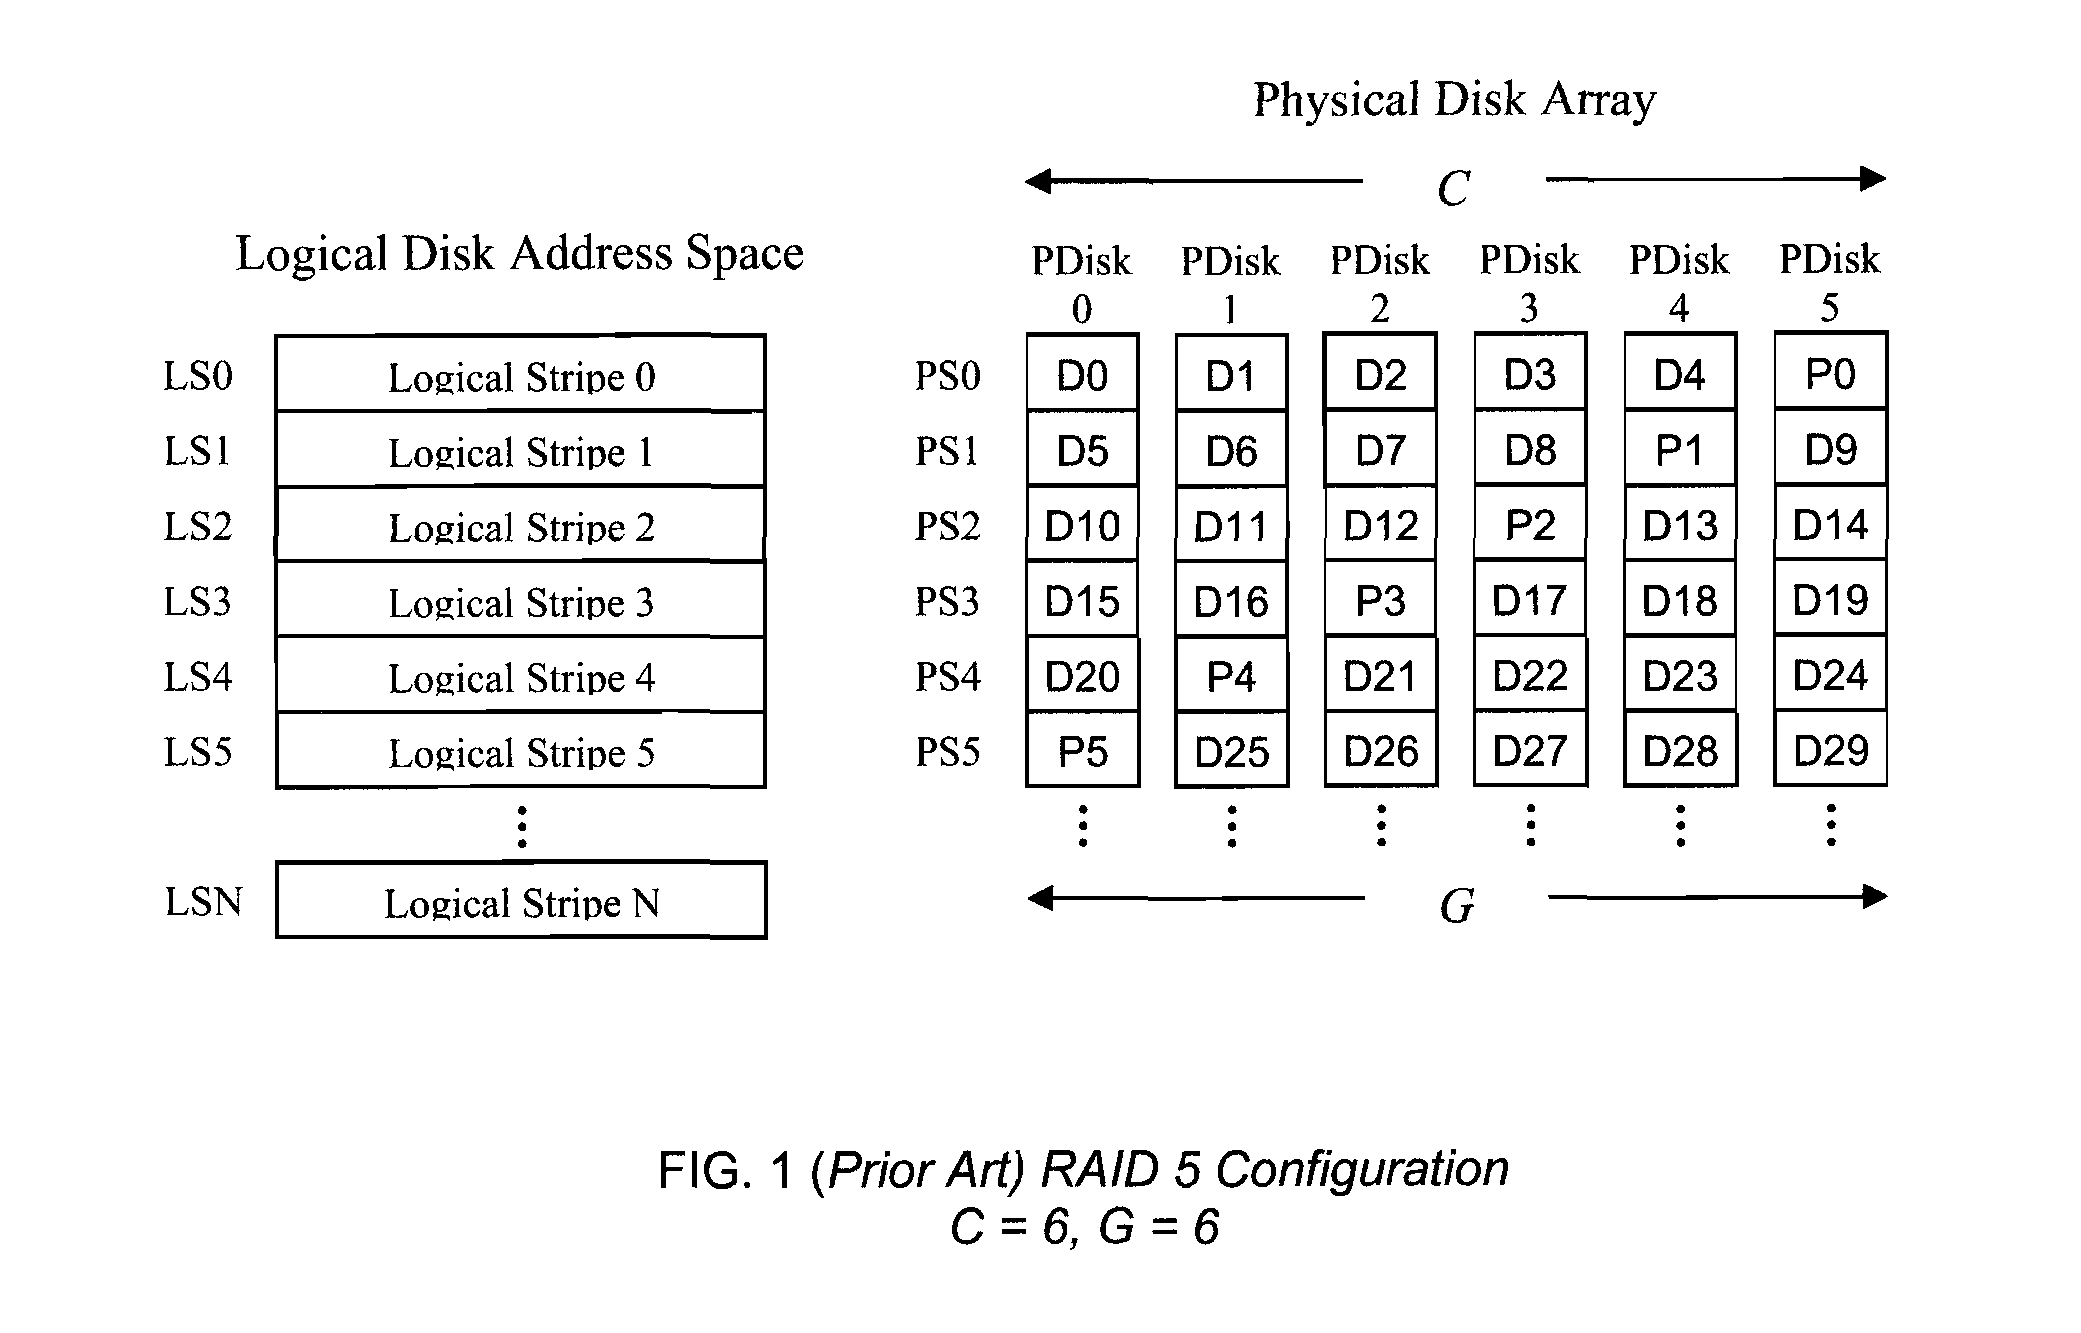 Parity declustered storage device array with partition groups